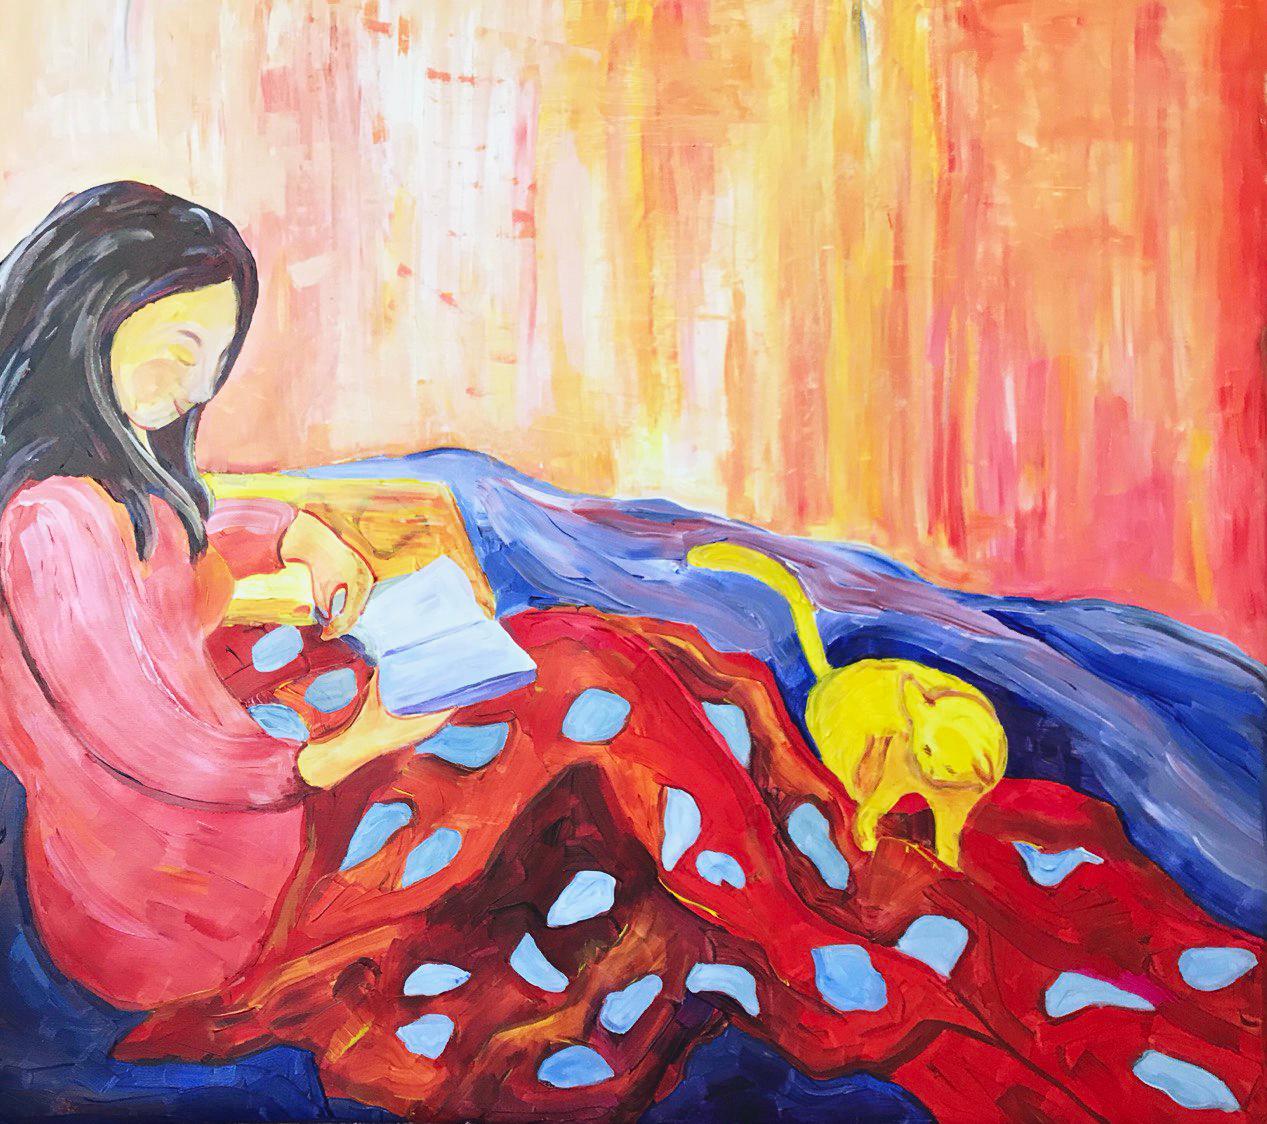 
In the latest installment of 'The Joy Series: A Journey to Inner Happiness,' the artist delves into the comforting realm of literature with the painting 'Cocoon of Comfort.'
This captivating artwork portrays a woman nestled under a cozy blanket,